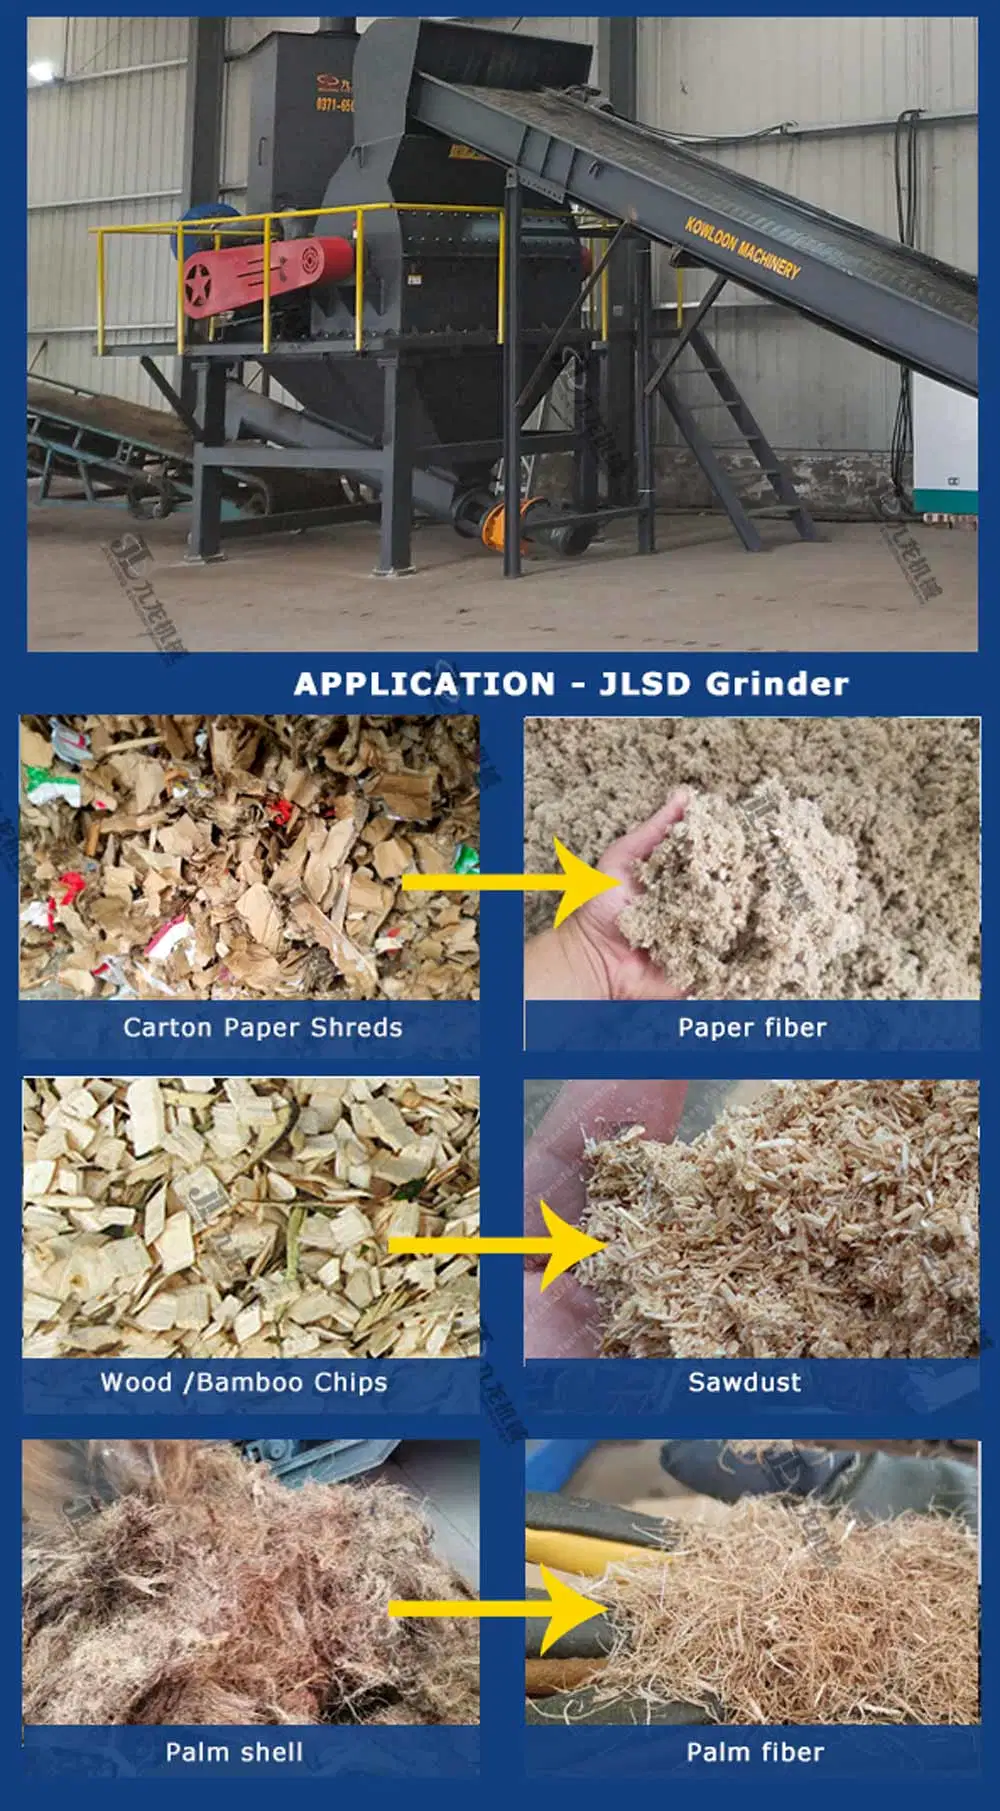 4-5 Tph Wood Hammer Mill Machine Grinding Into Sawdust for Making Pellet